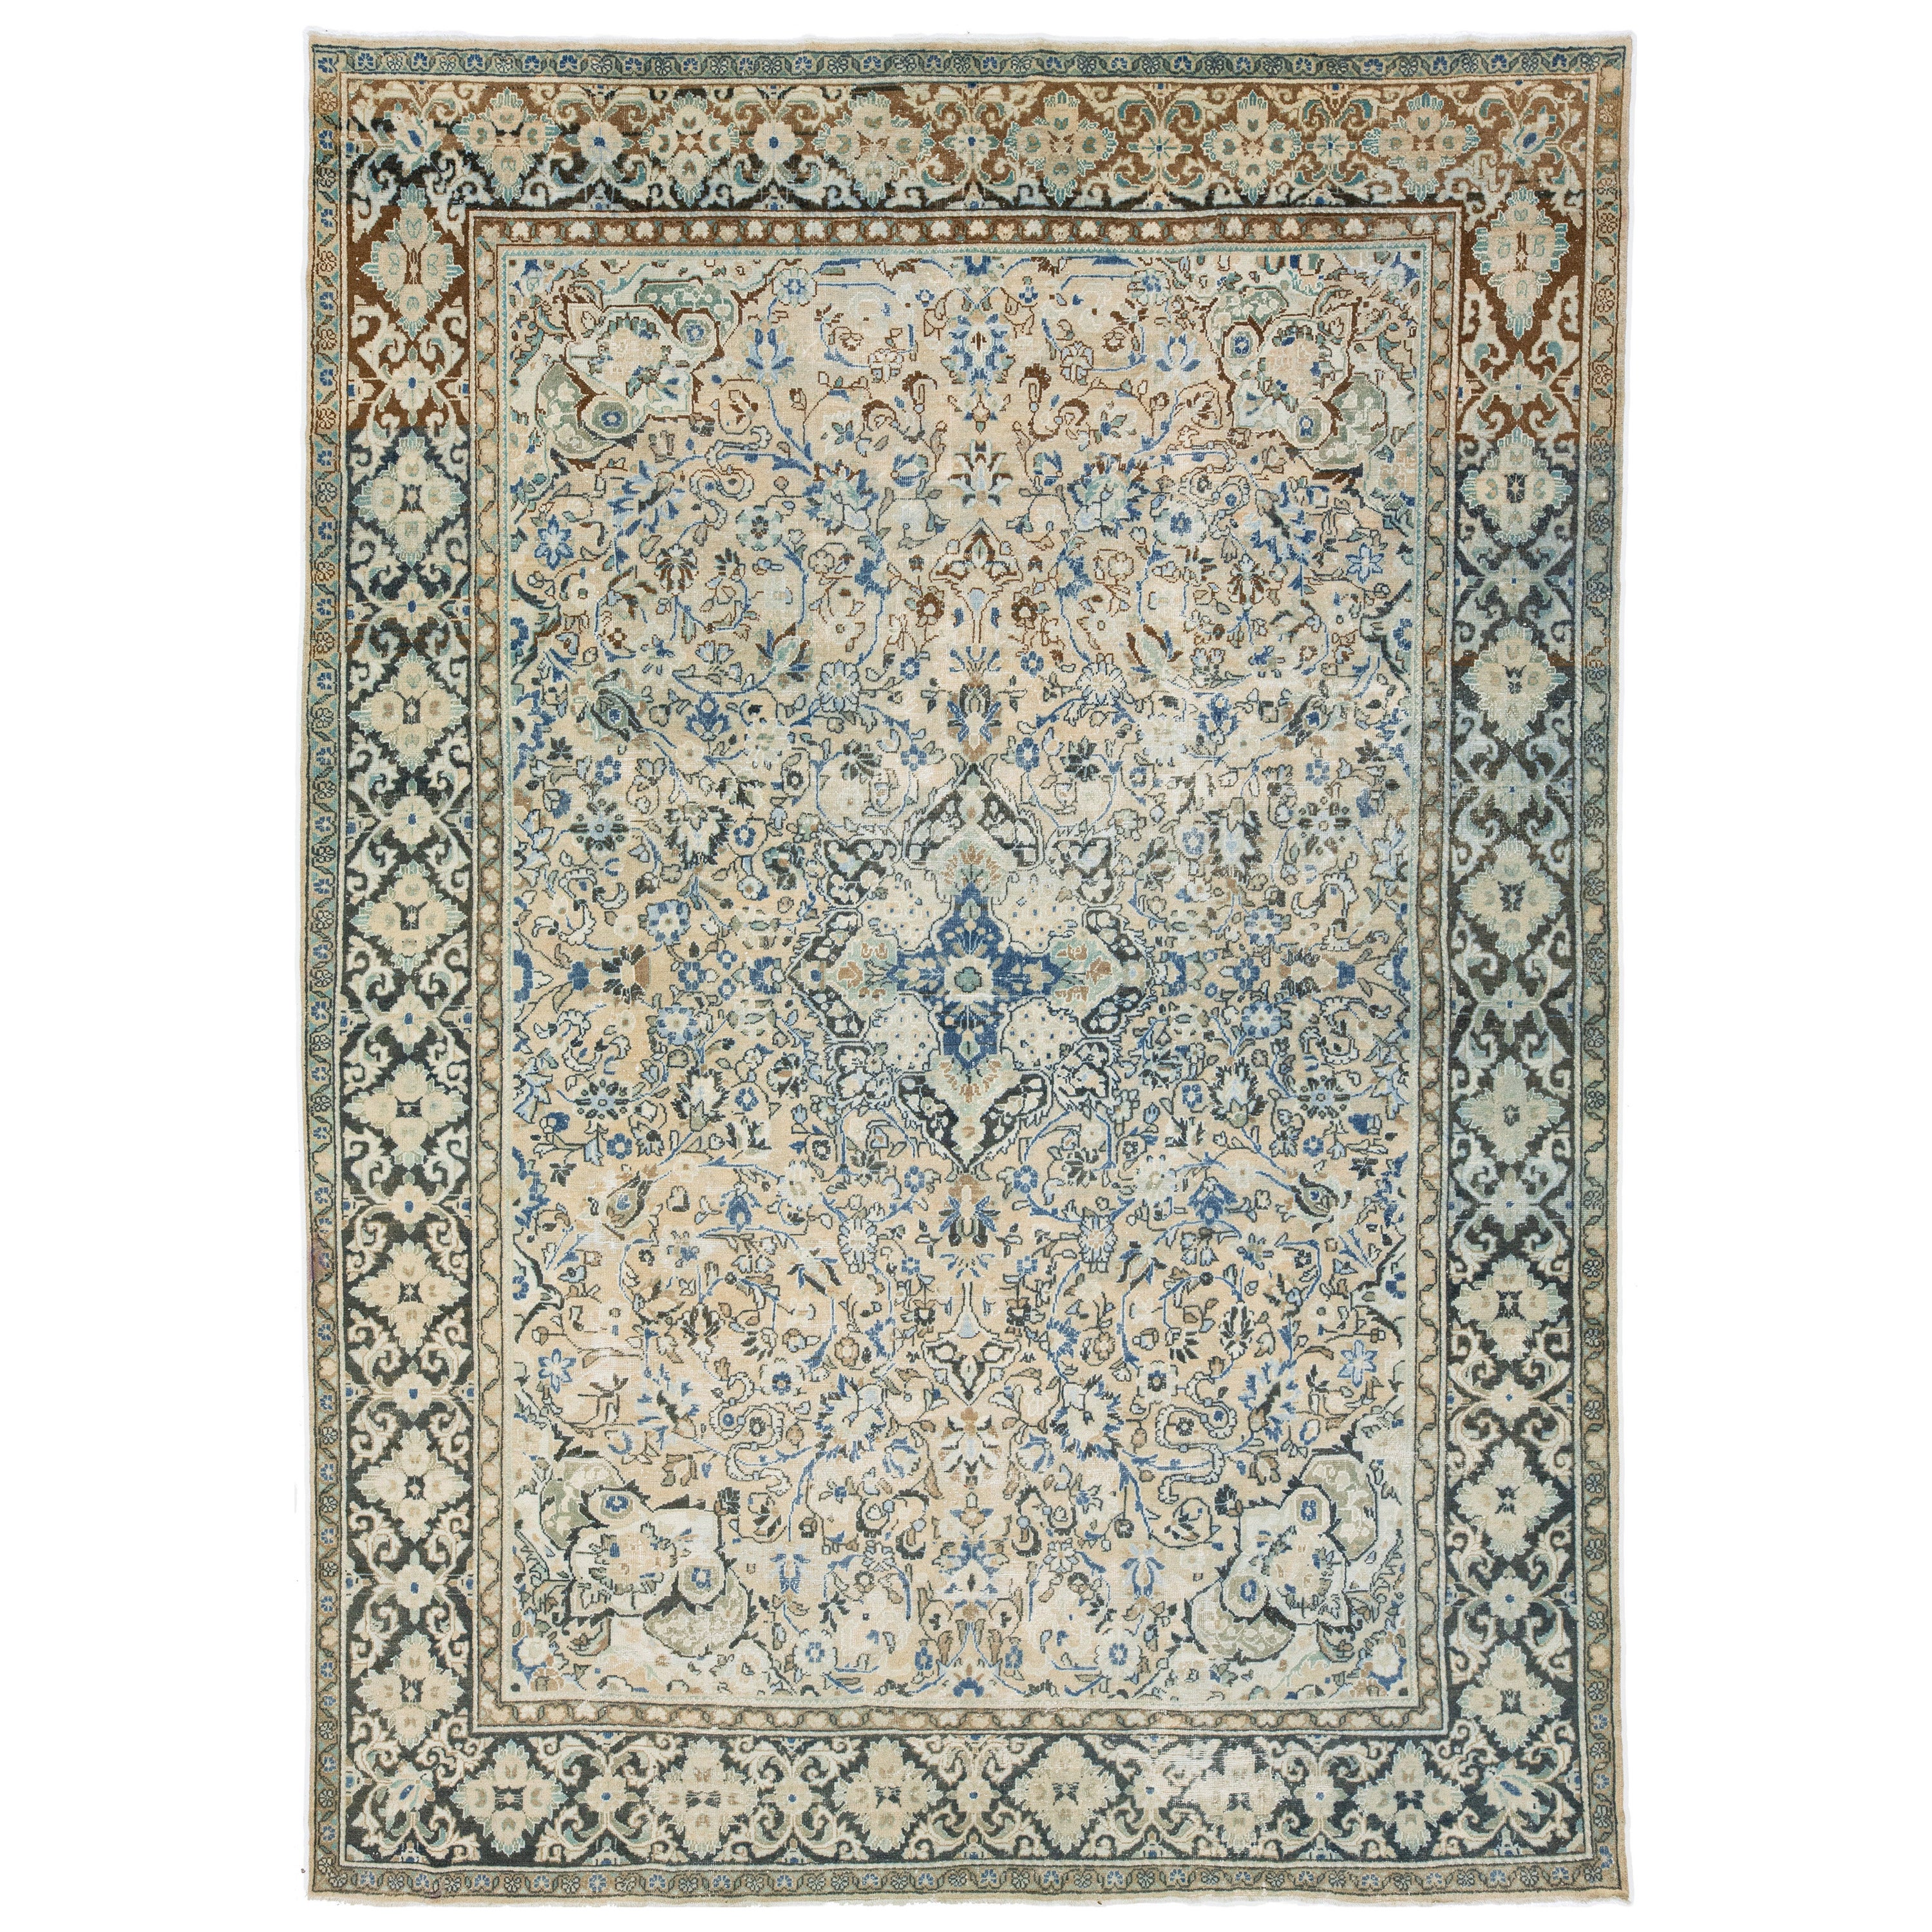 1930's Handmade Persian Mahal Wool Rug Featuring an Allover Blue Pattern  For Sale